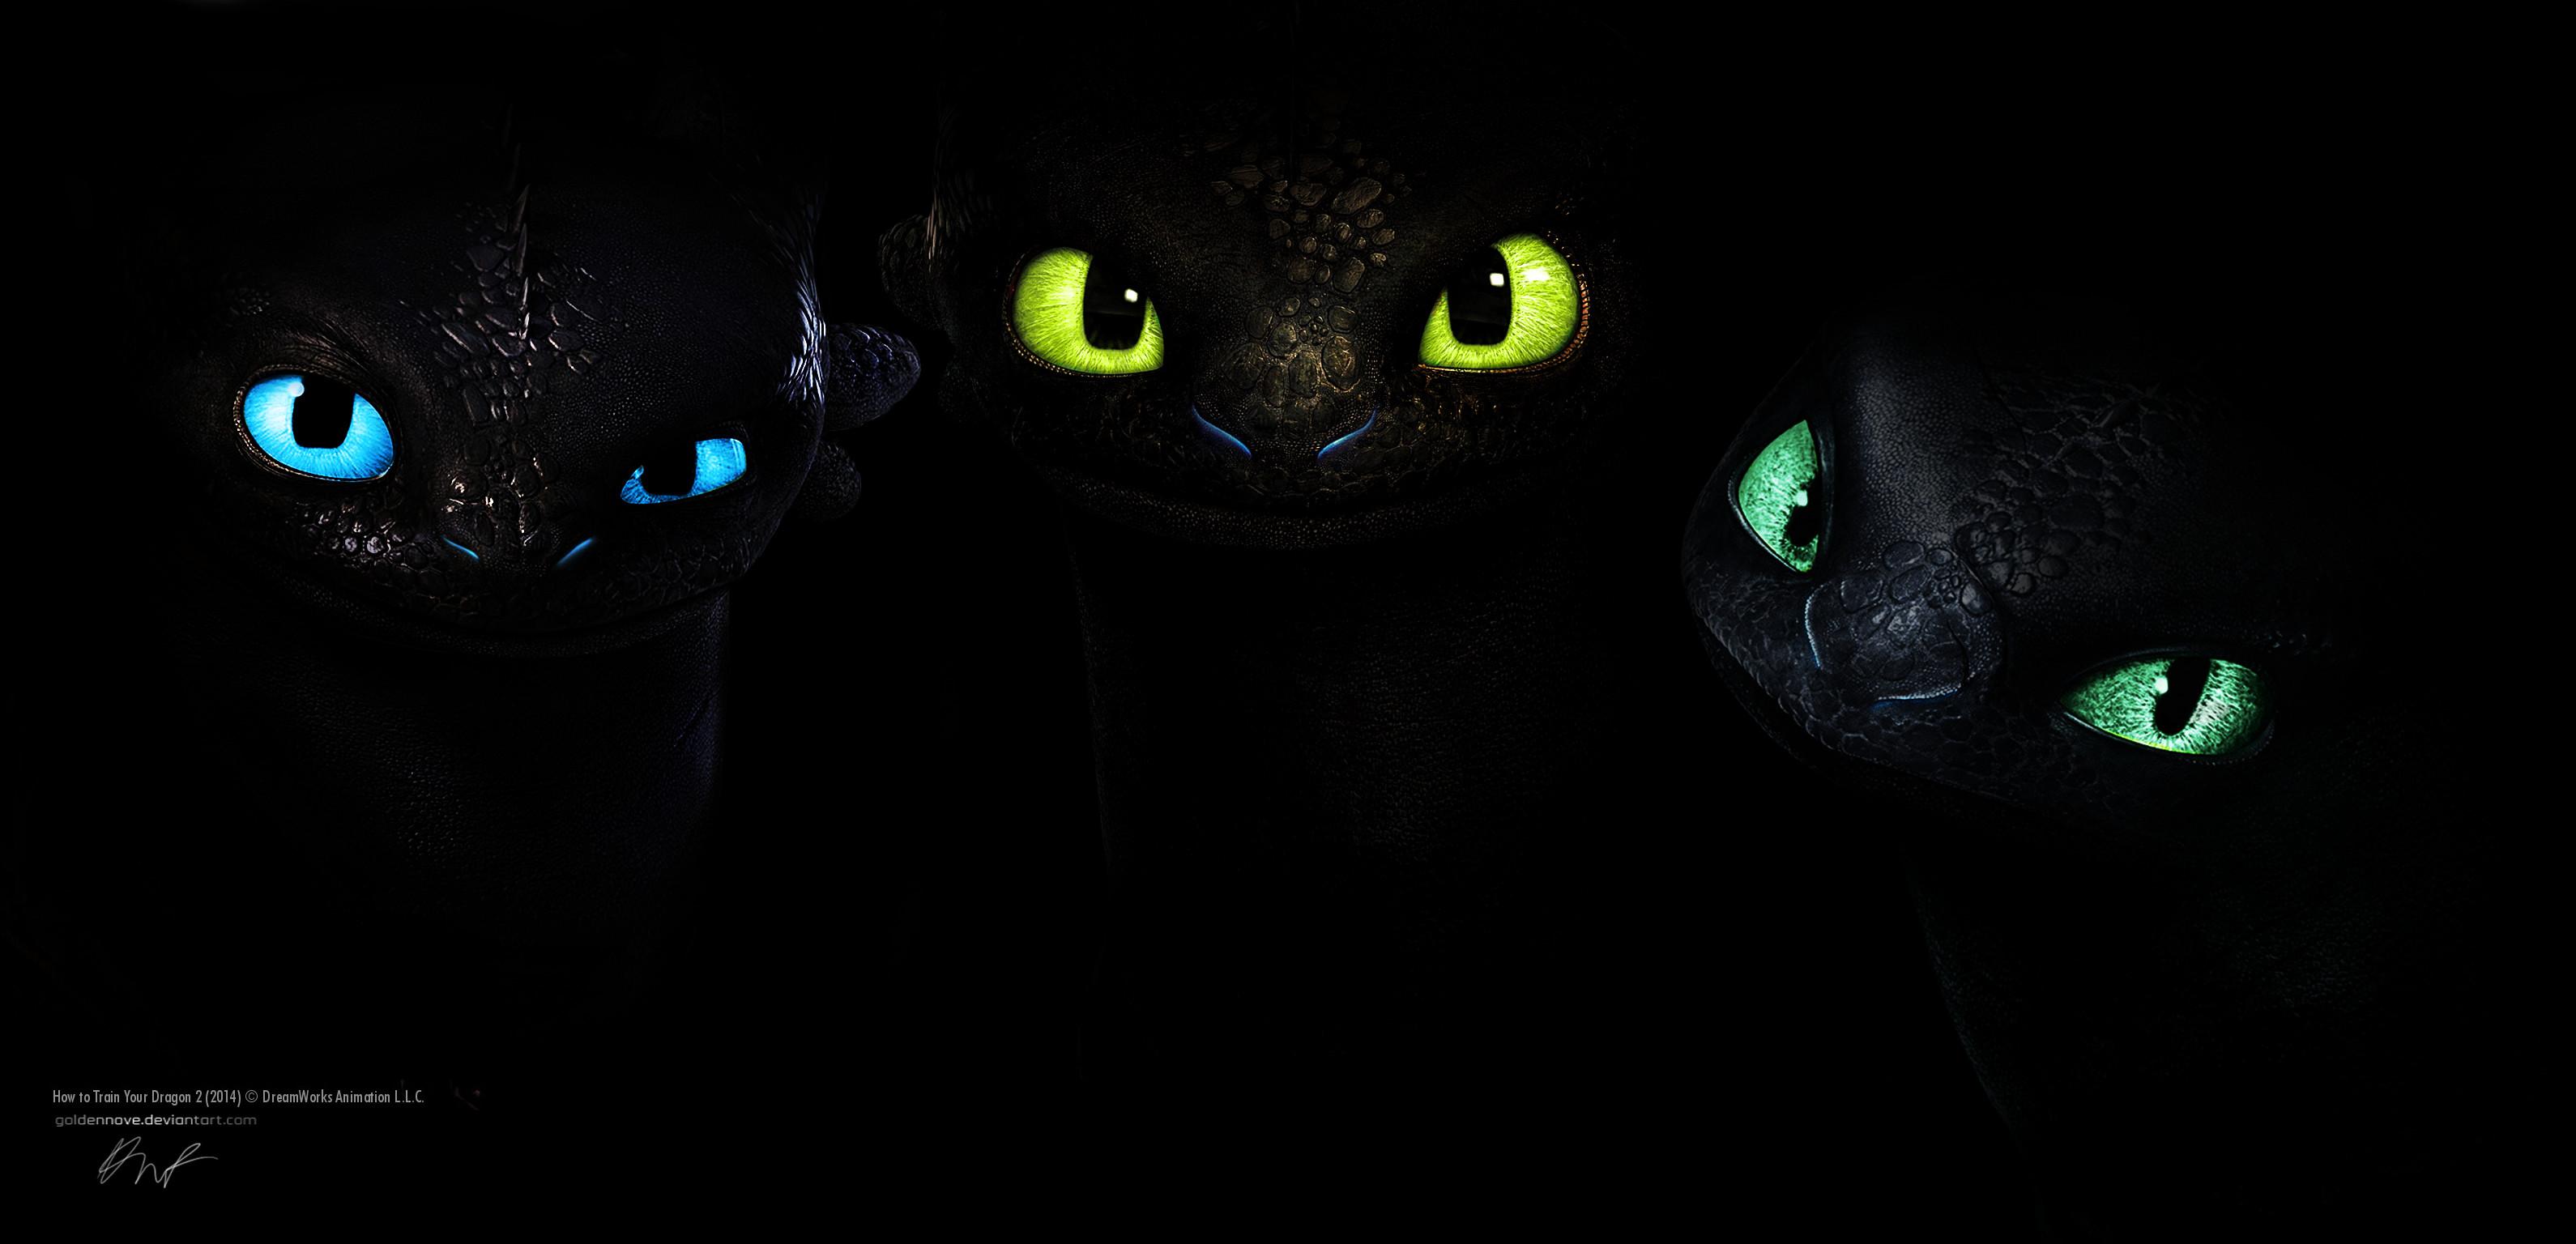 How To Train Your Dragon Night Light Wallpapers - Wallpaper Cave